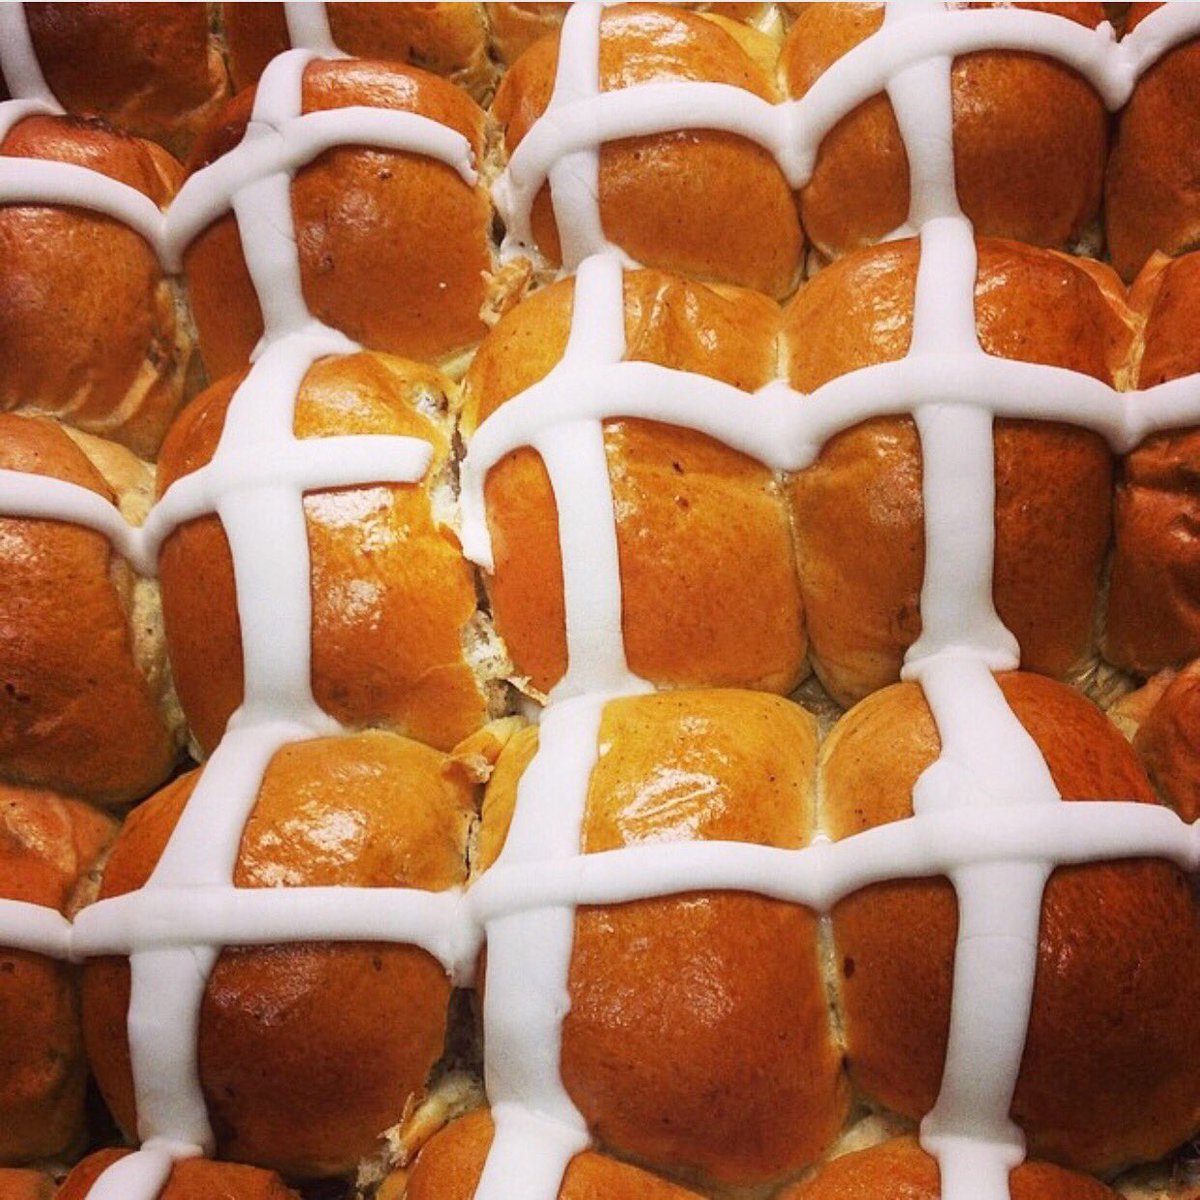 Dating back to the 12th century, buns were marked with a cross on #GoodFriday & have become a symbol for Easter. Hot Cross Buns are a must today! 

#HotCrossBuns #challah #tradition #frenchtradition #breadbaking #Easterbread